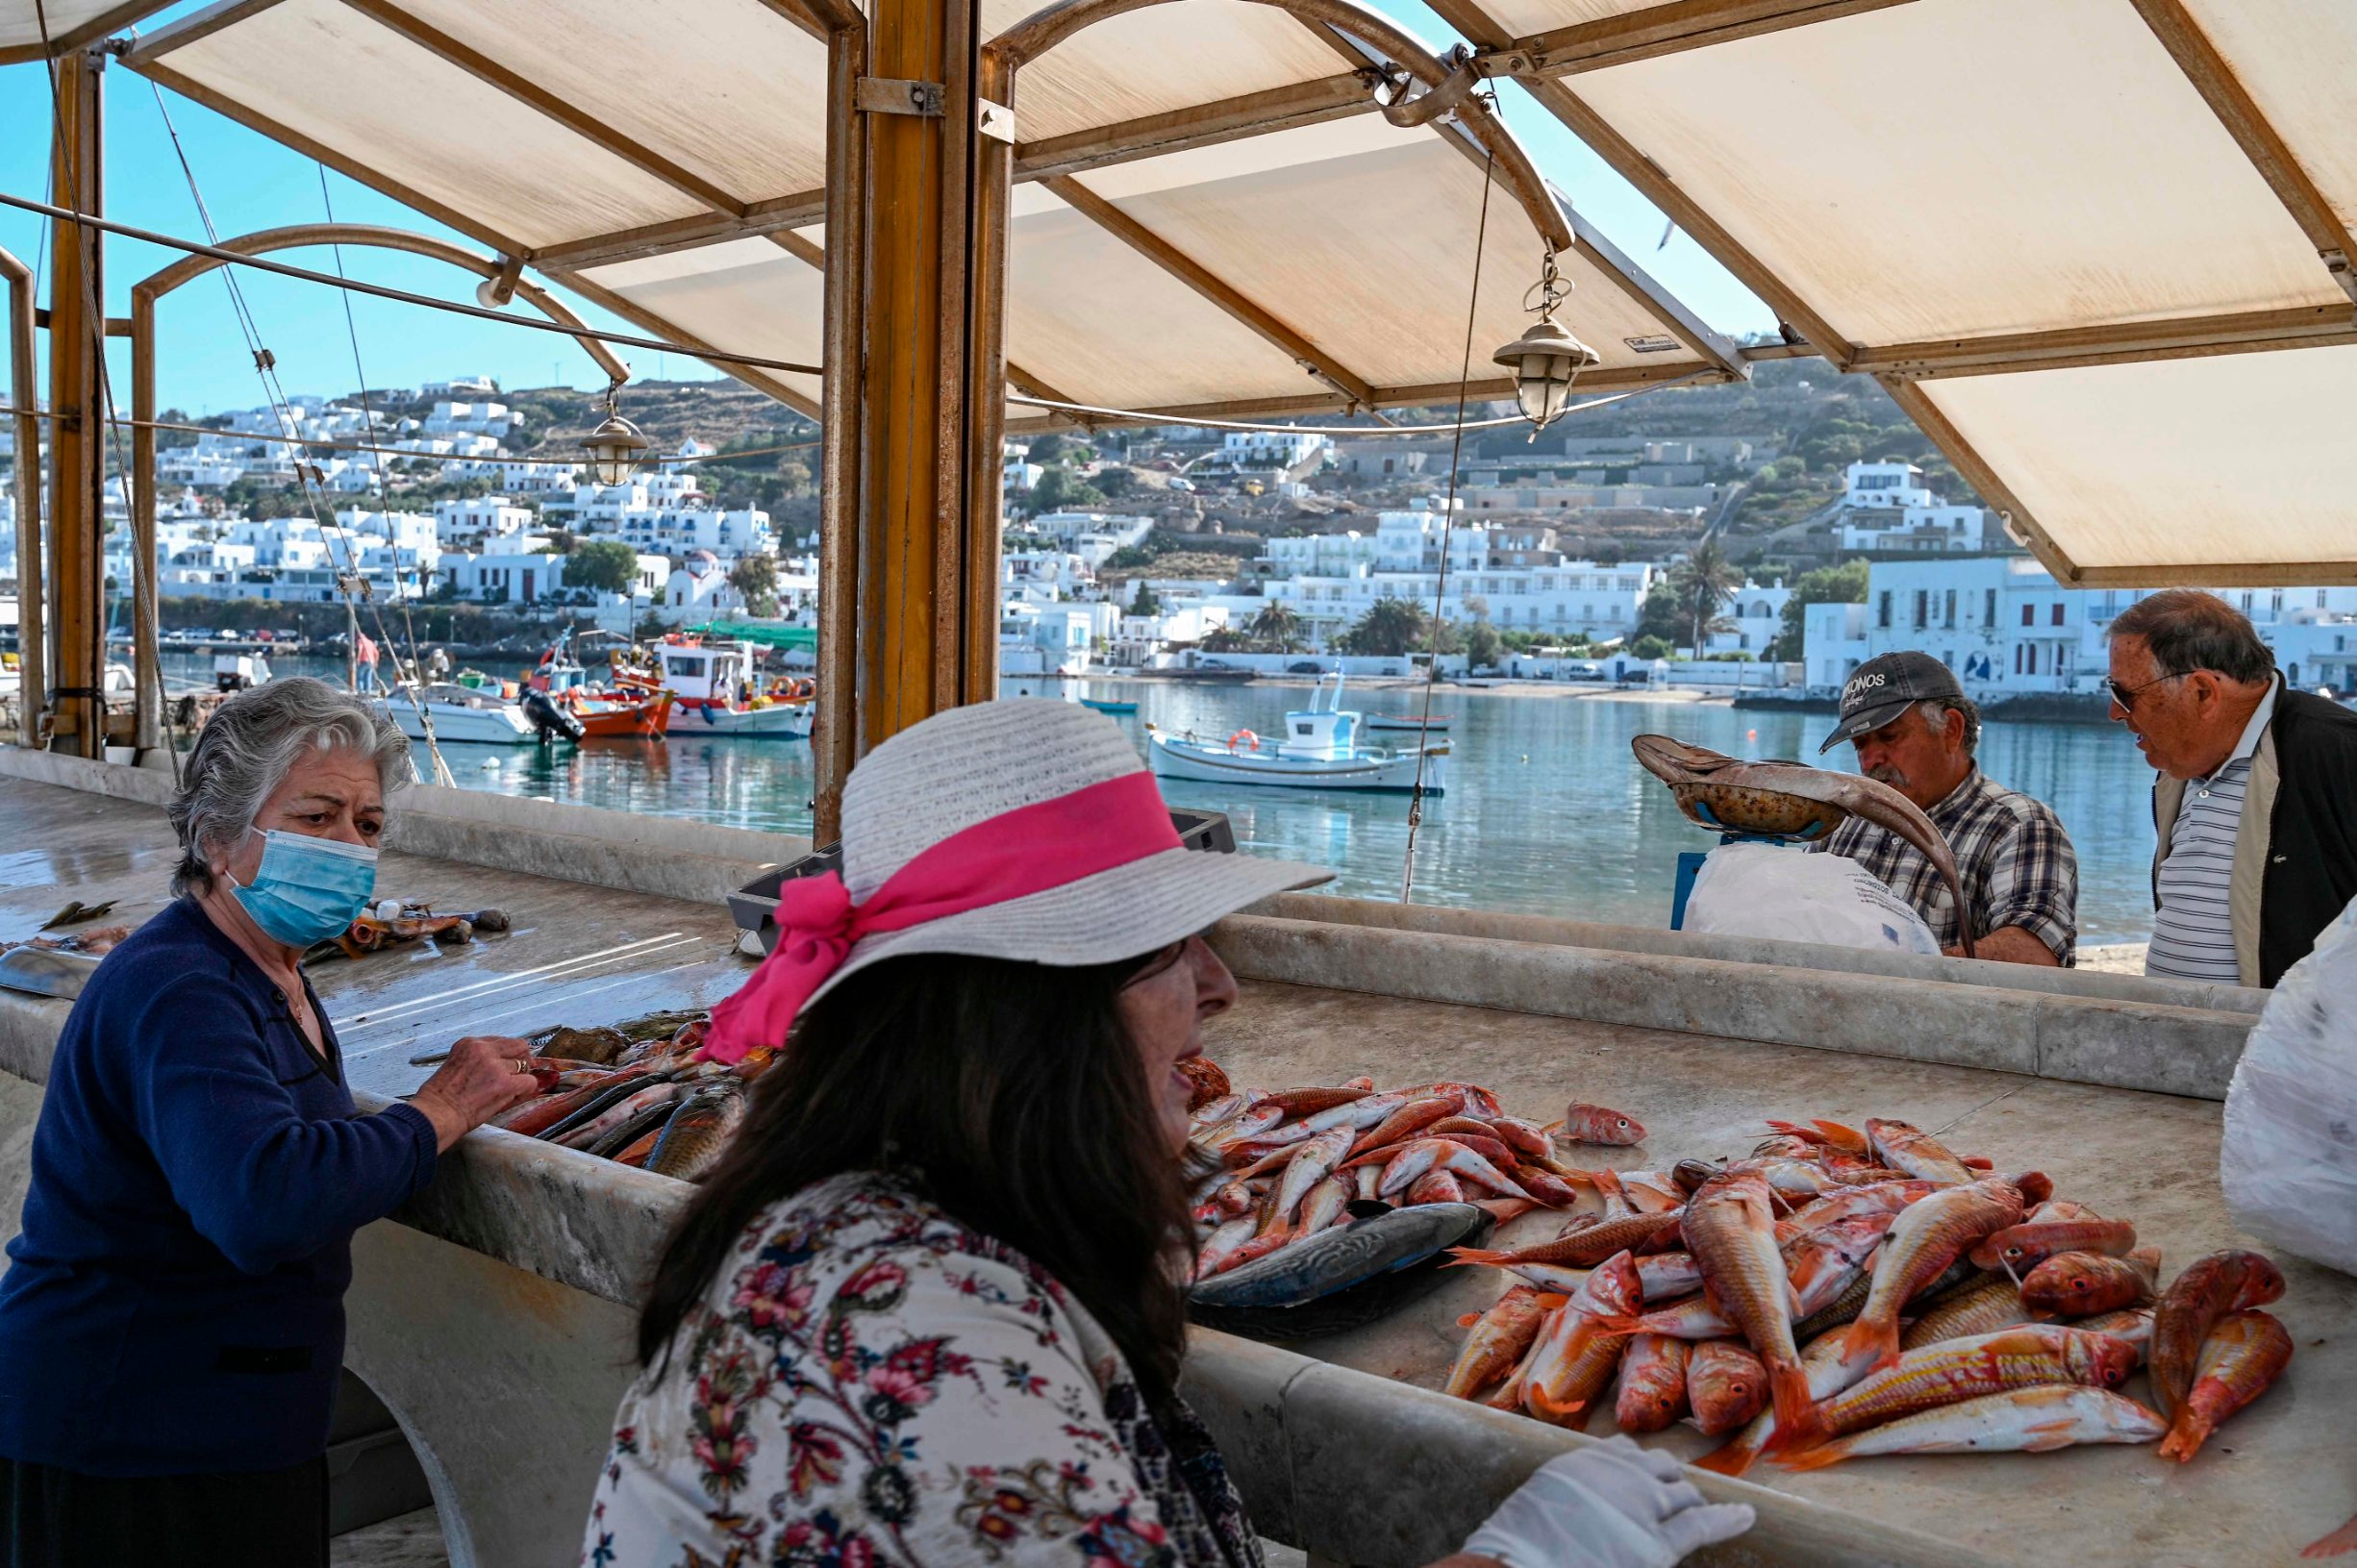 People buy fresh fish at a fisherman stand in the old port of the Greek Cycladic island of Mykonos, on May 13, 2020. - In Mykonos, at the start of the tourist season, the image is striking: the posh island traditionally crowded with wealthy foreigners has turned into a ghost island, offering visitors deserted alleys, boarded up shops, restaurants and abandoned hotels. (Photo by ARIS MESSINIS / AFP)